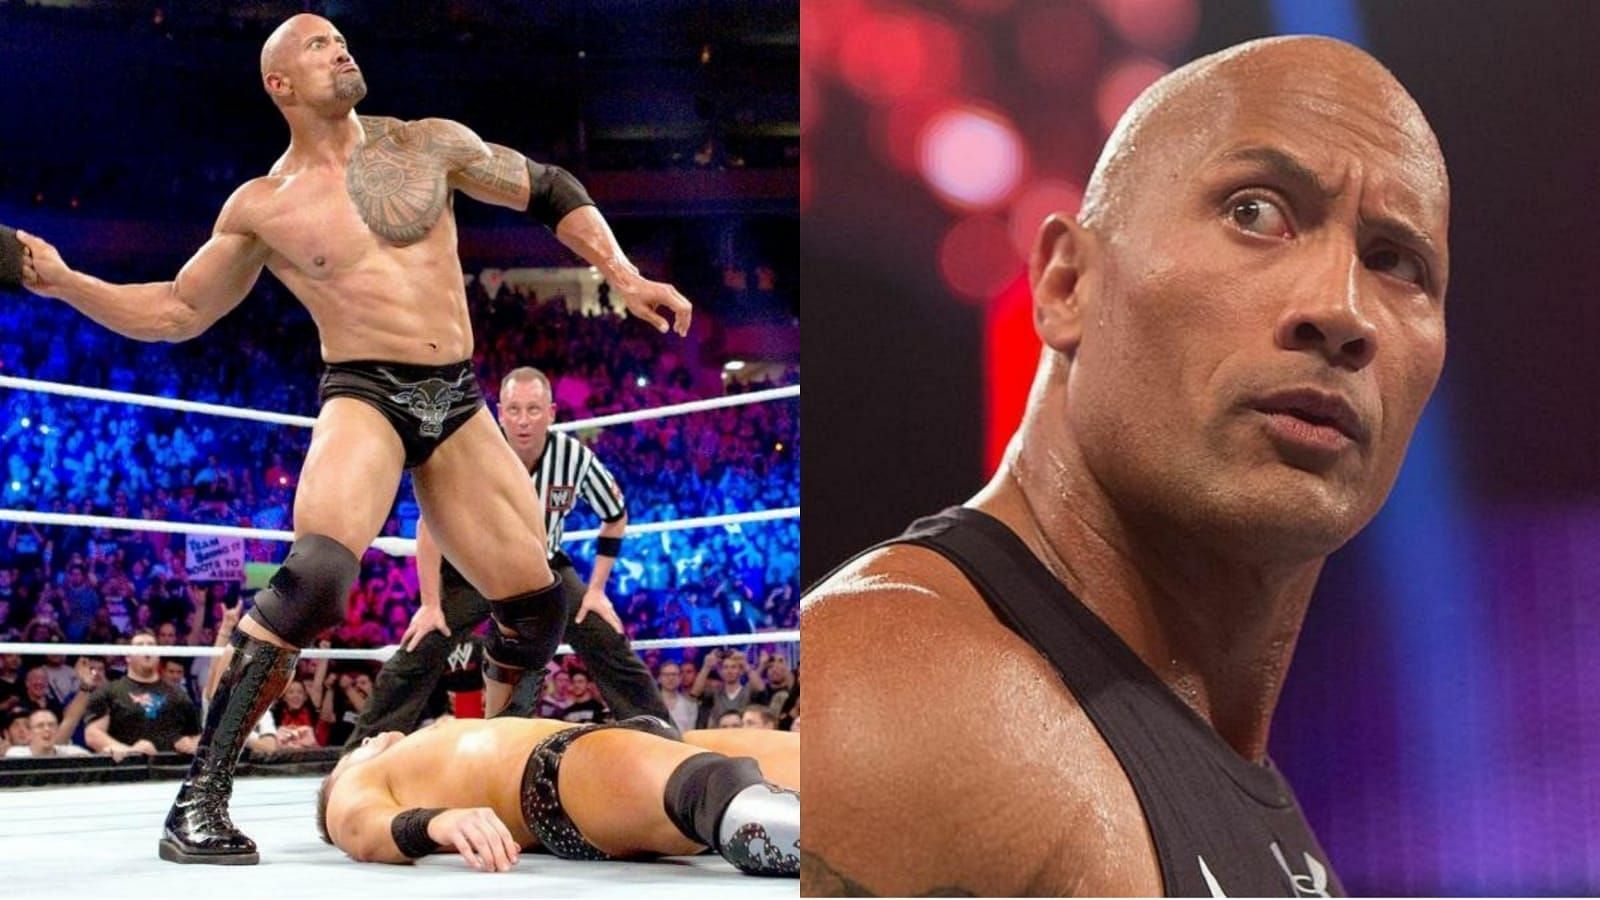 The Rock is rumored to return to WWE soon!